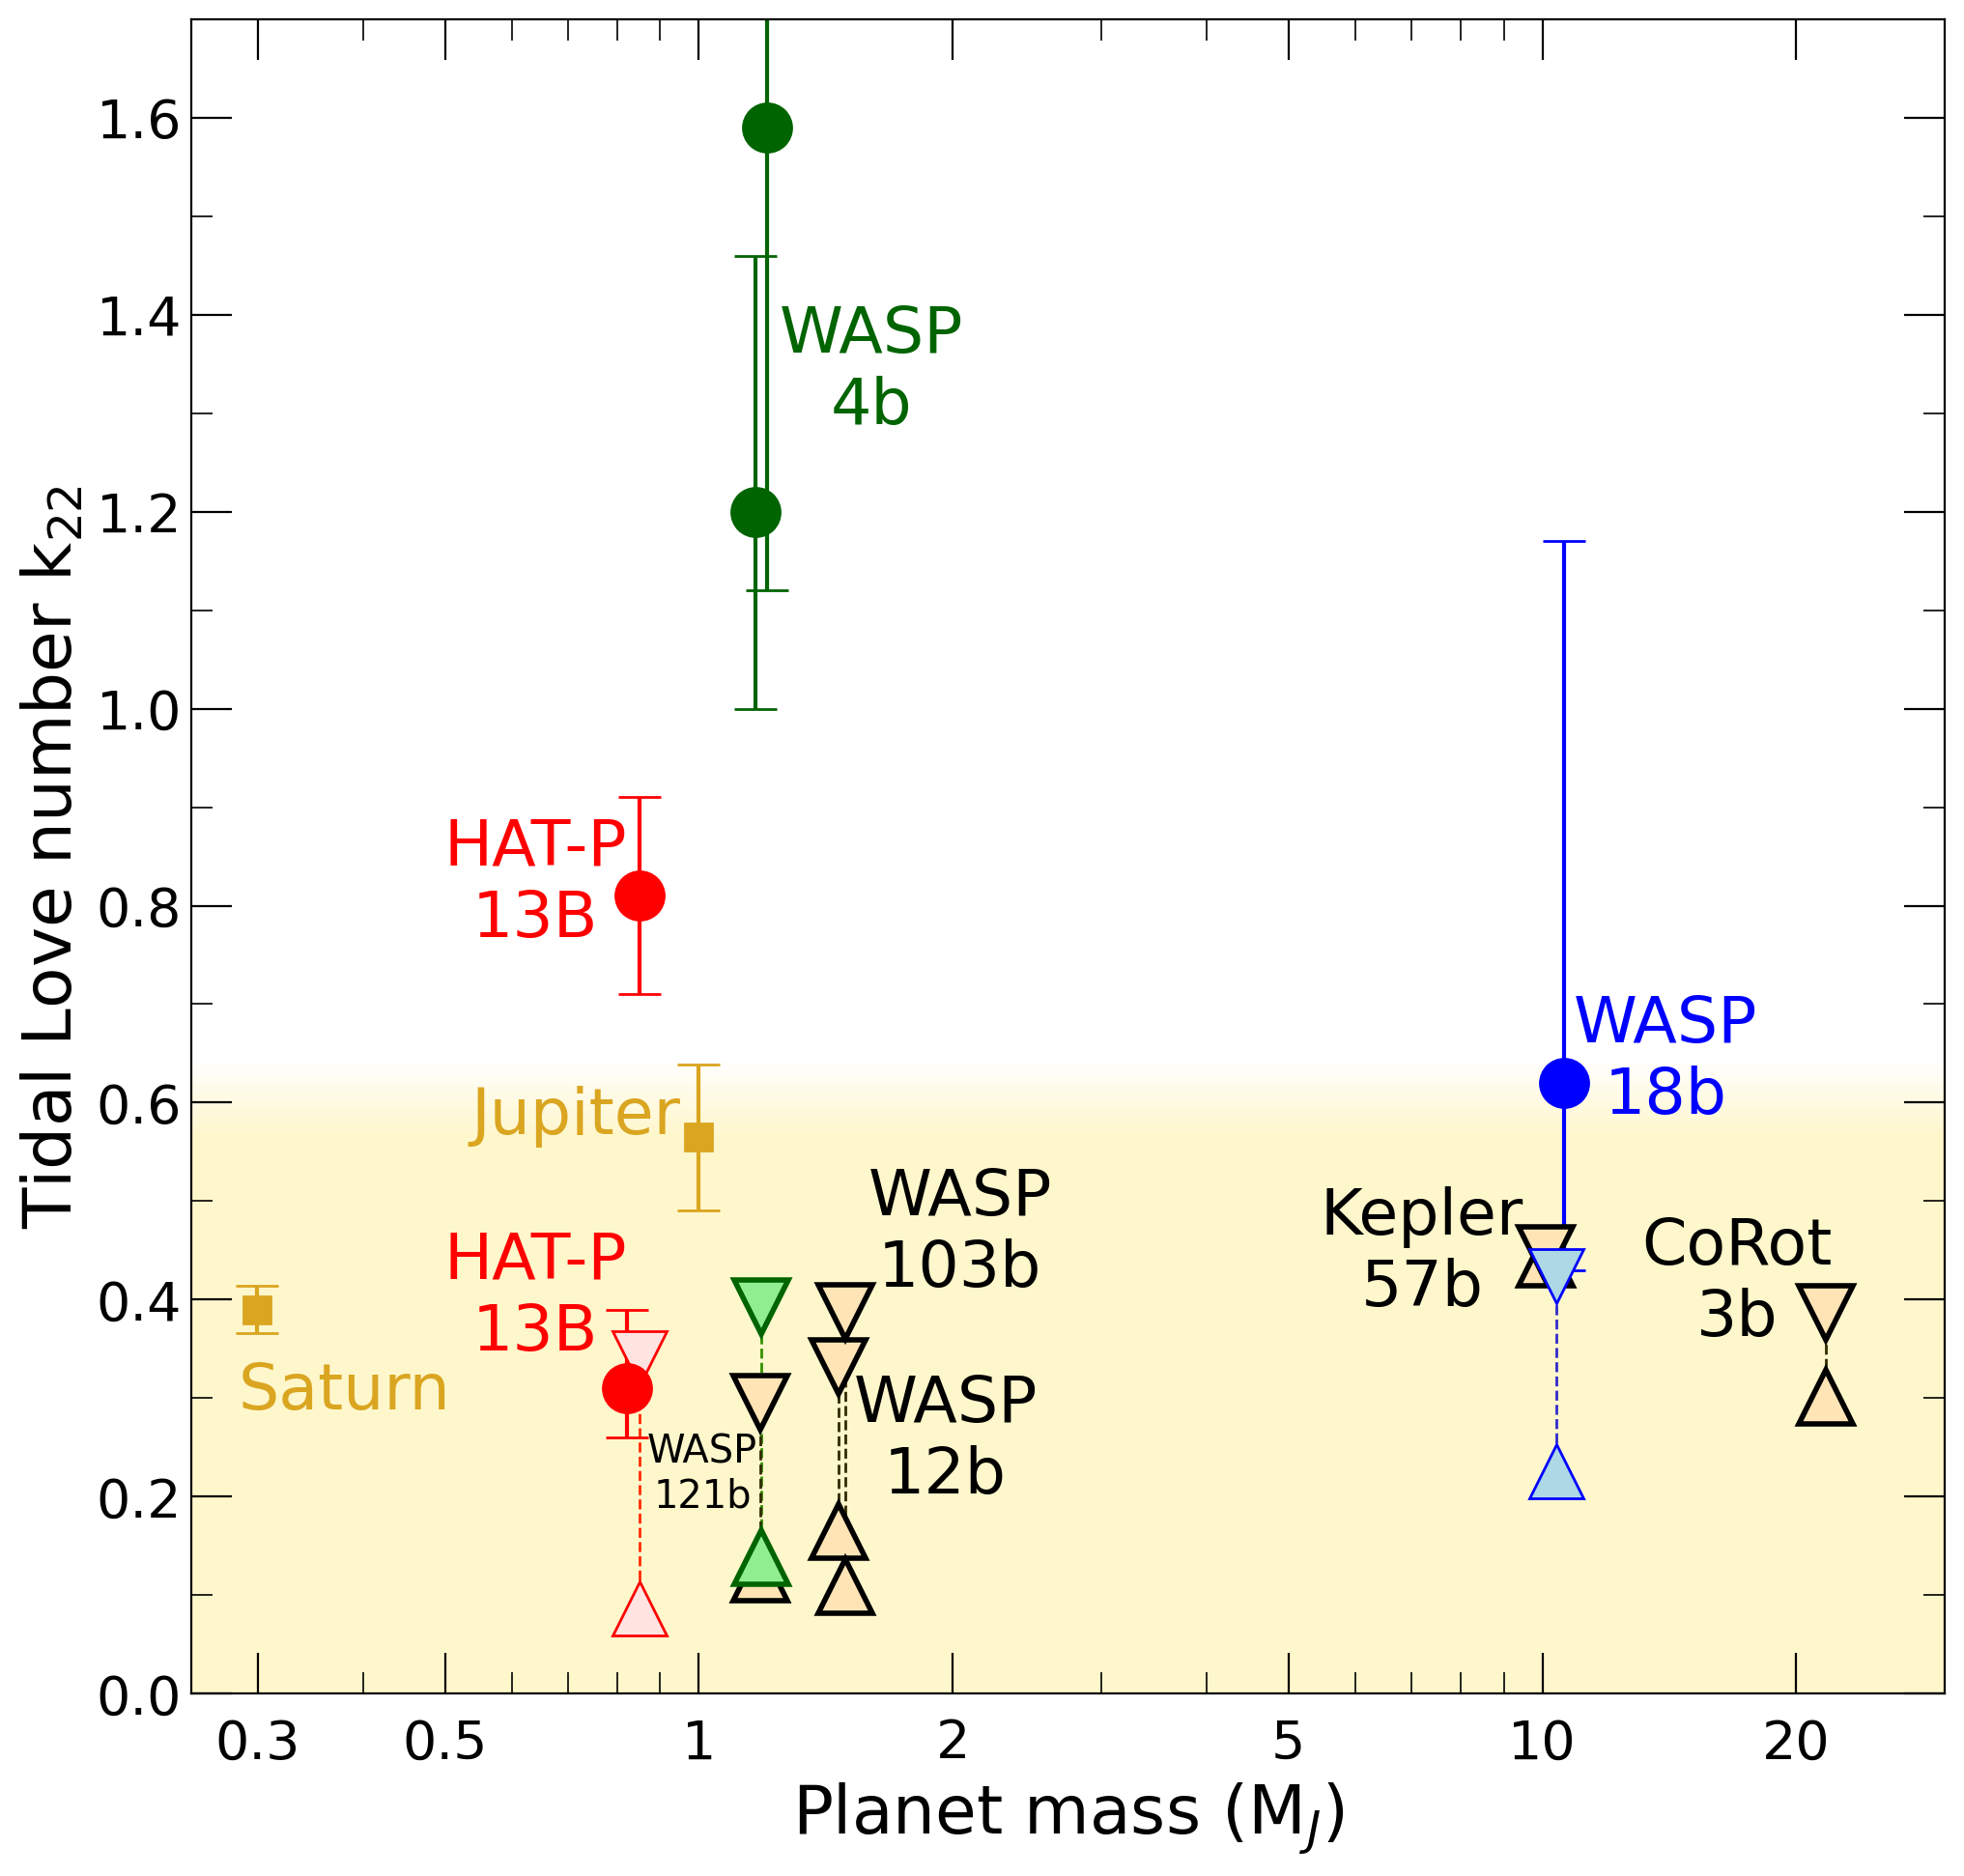 k22 compared with observations